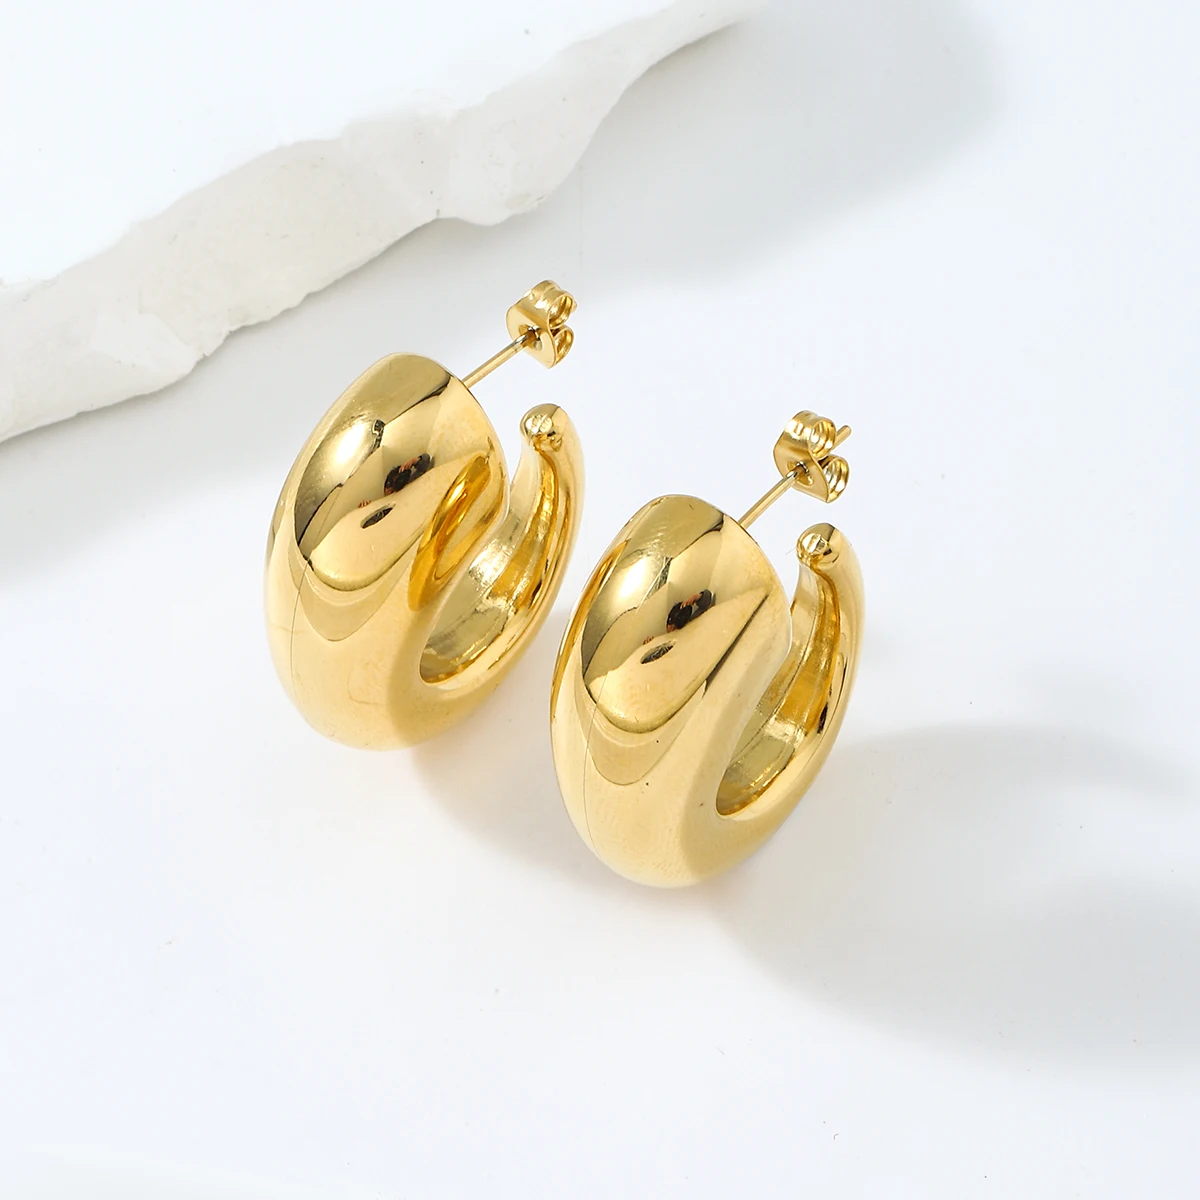 Ruigang Rge2486 Stainless Steel C Shape Chunky Gold Earring Unique Gold ...